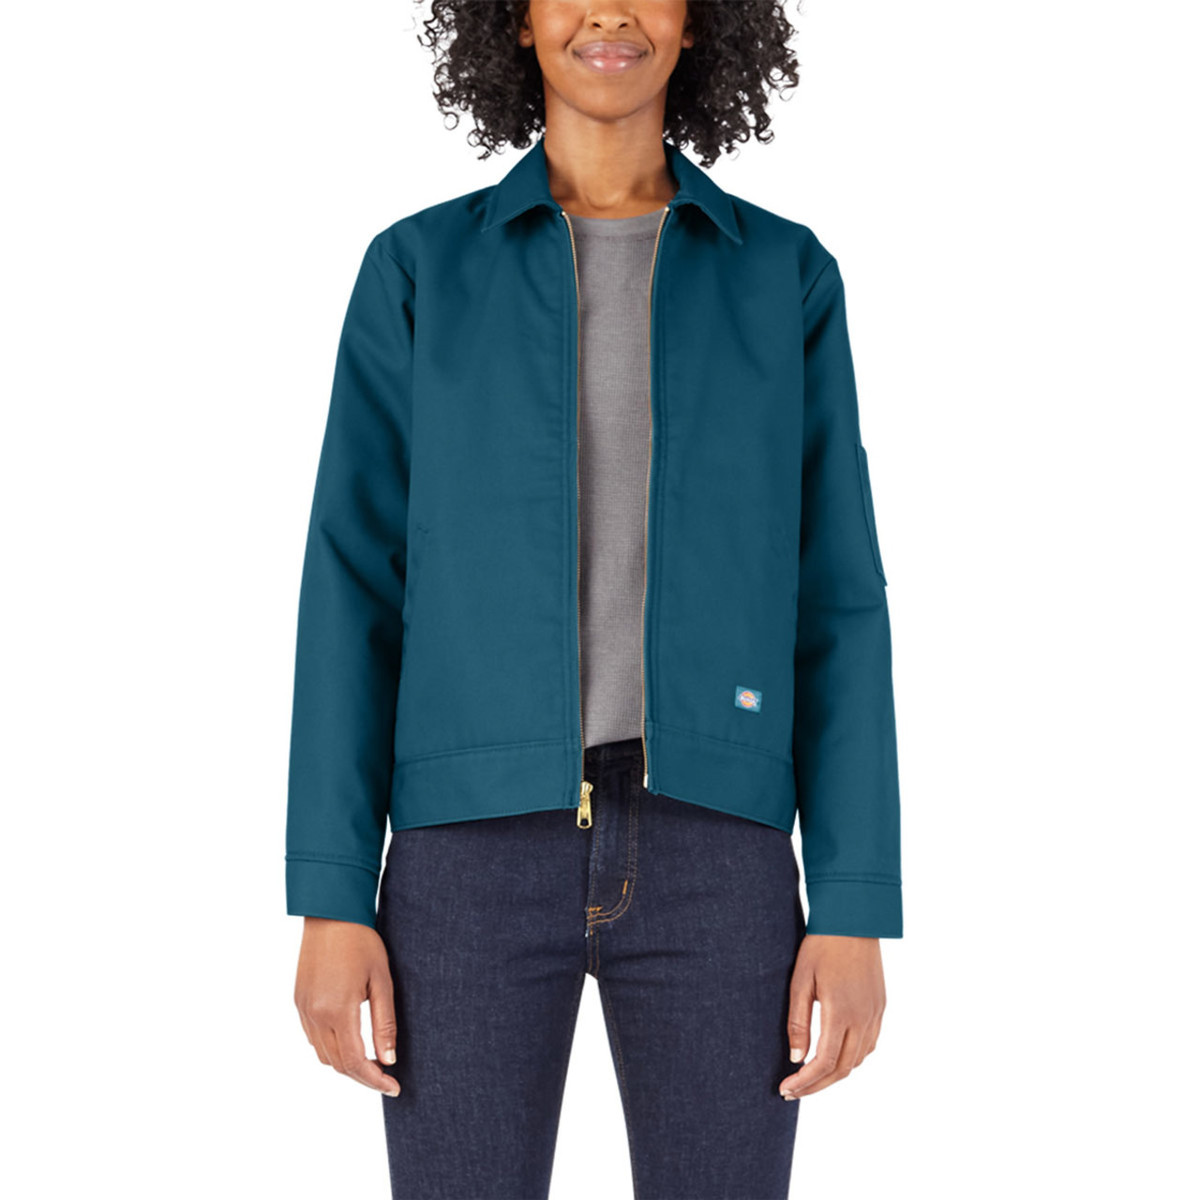 Dickies Women's Eisenhower Insulated Jacket - Shop Now!